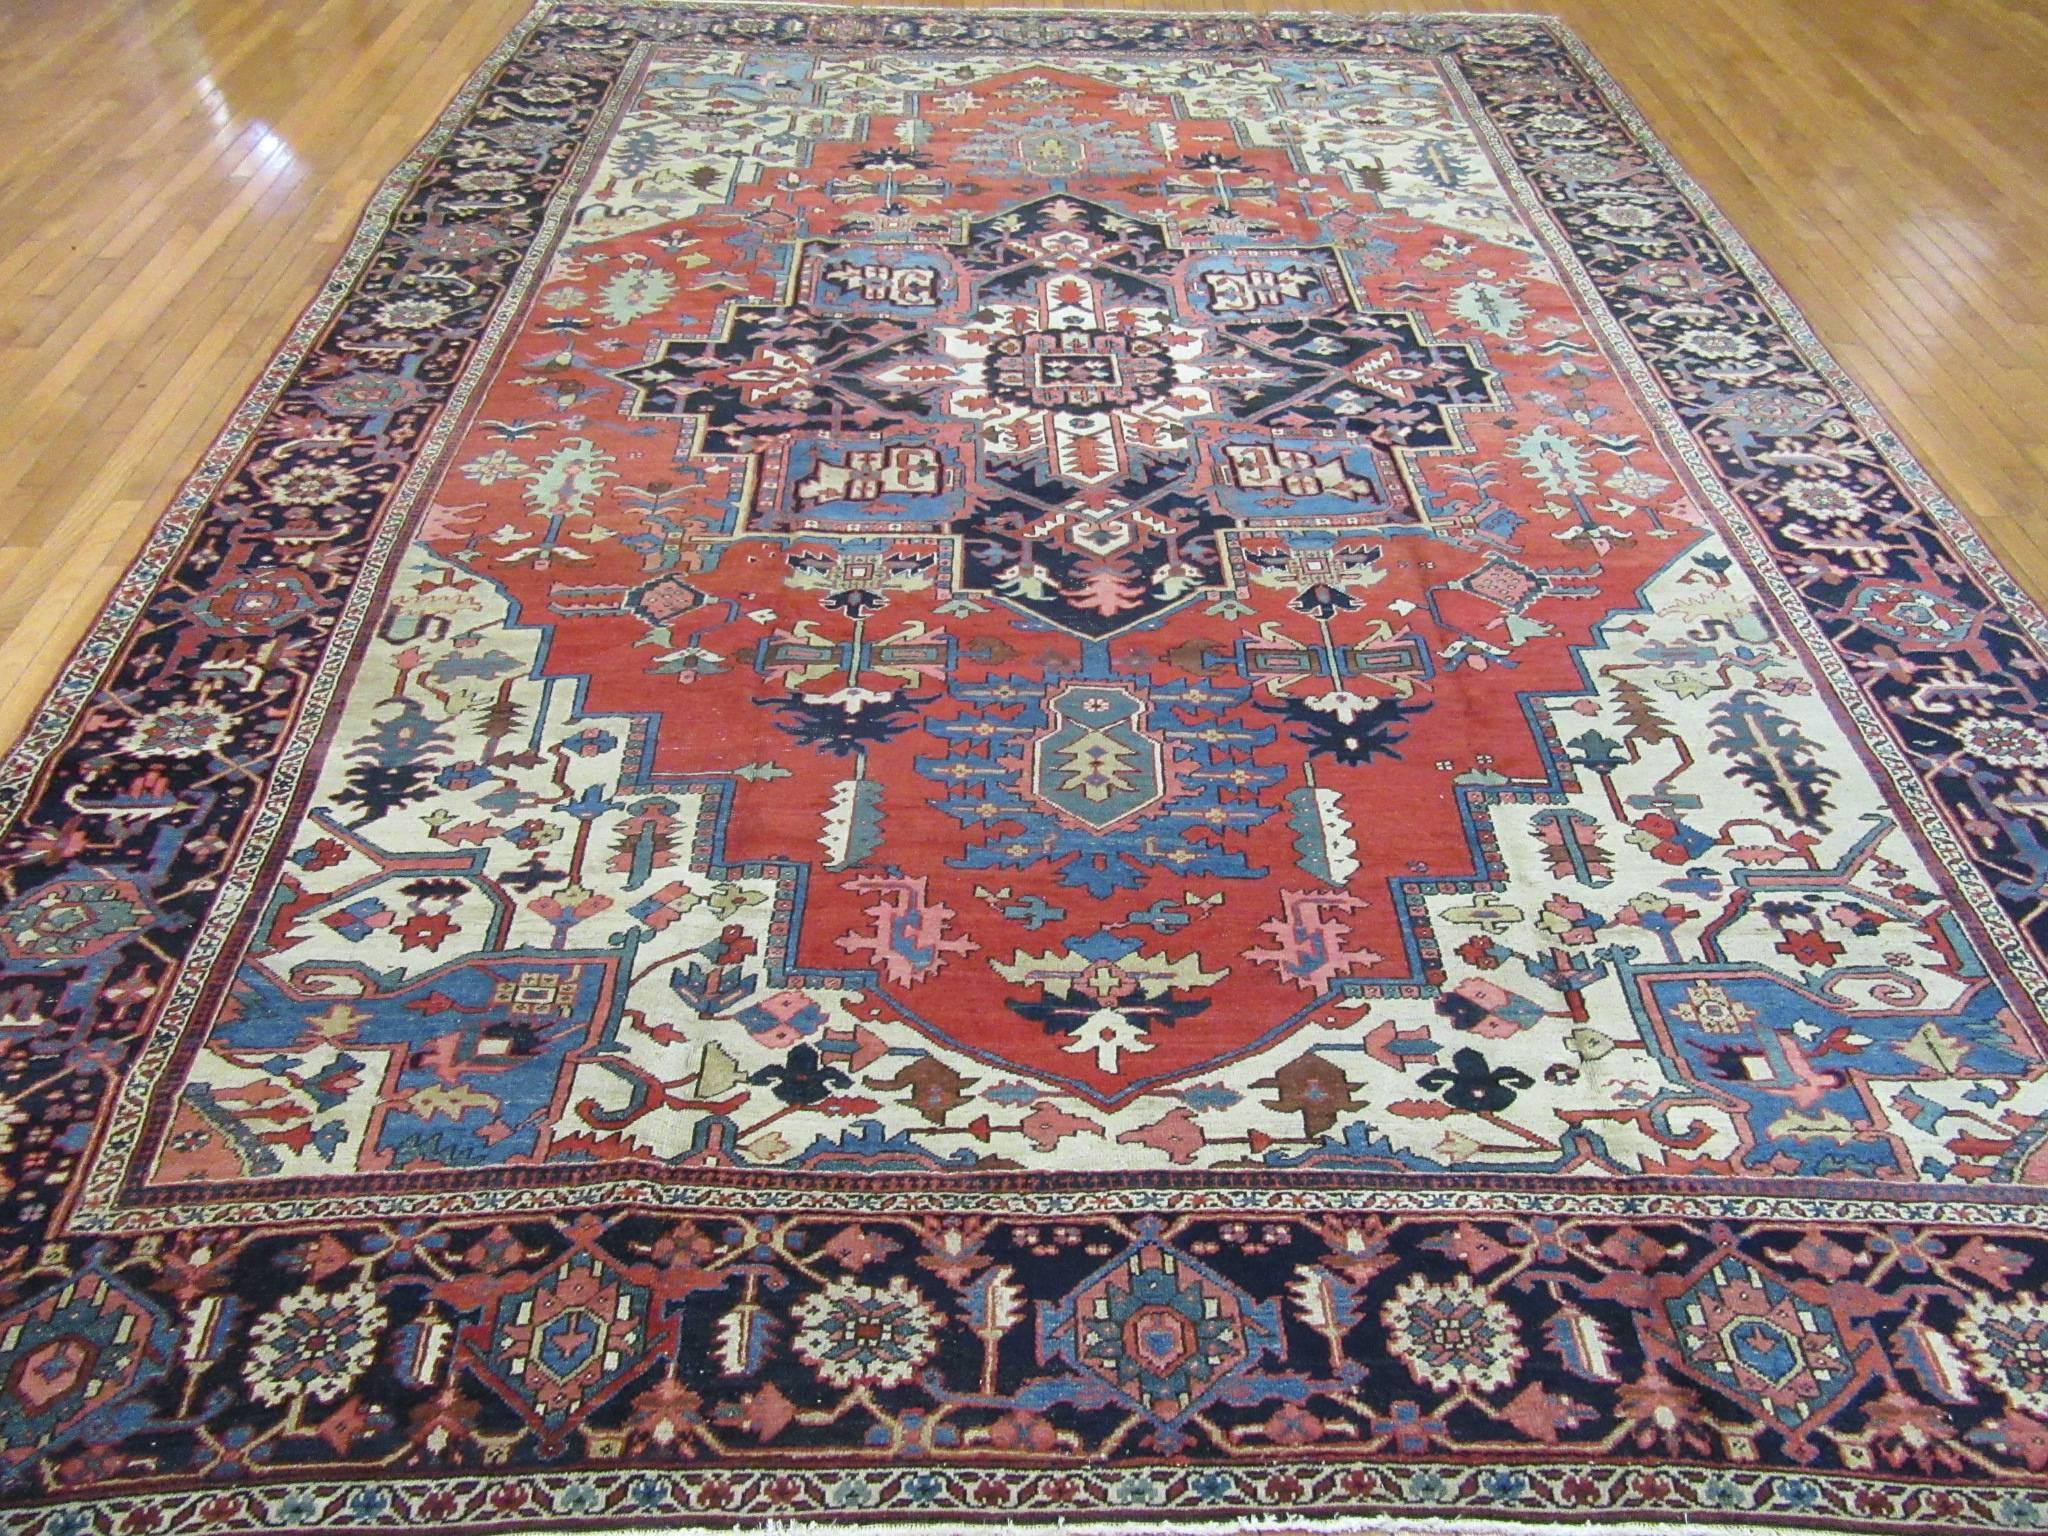 This is a genuine antique room size hand-knotted Persian Serapi rug. It is made with fine wool colored with natural dyes on a cotton foundation. It has the central and corner medallion geometric design trademark of these type of rugs. The rug